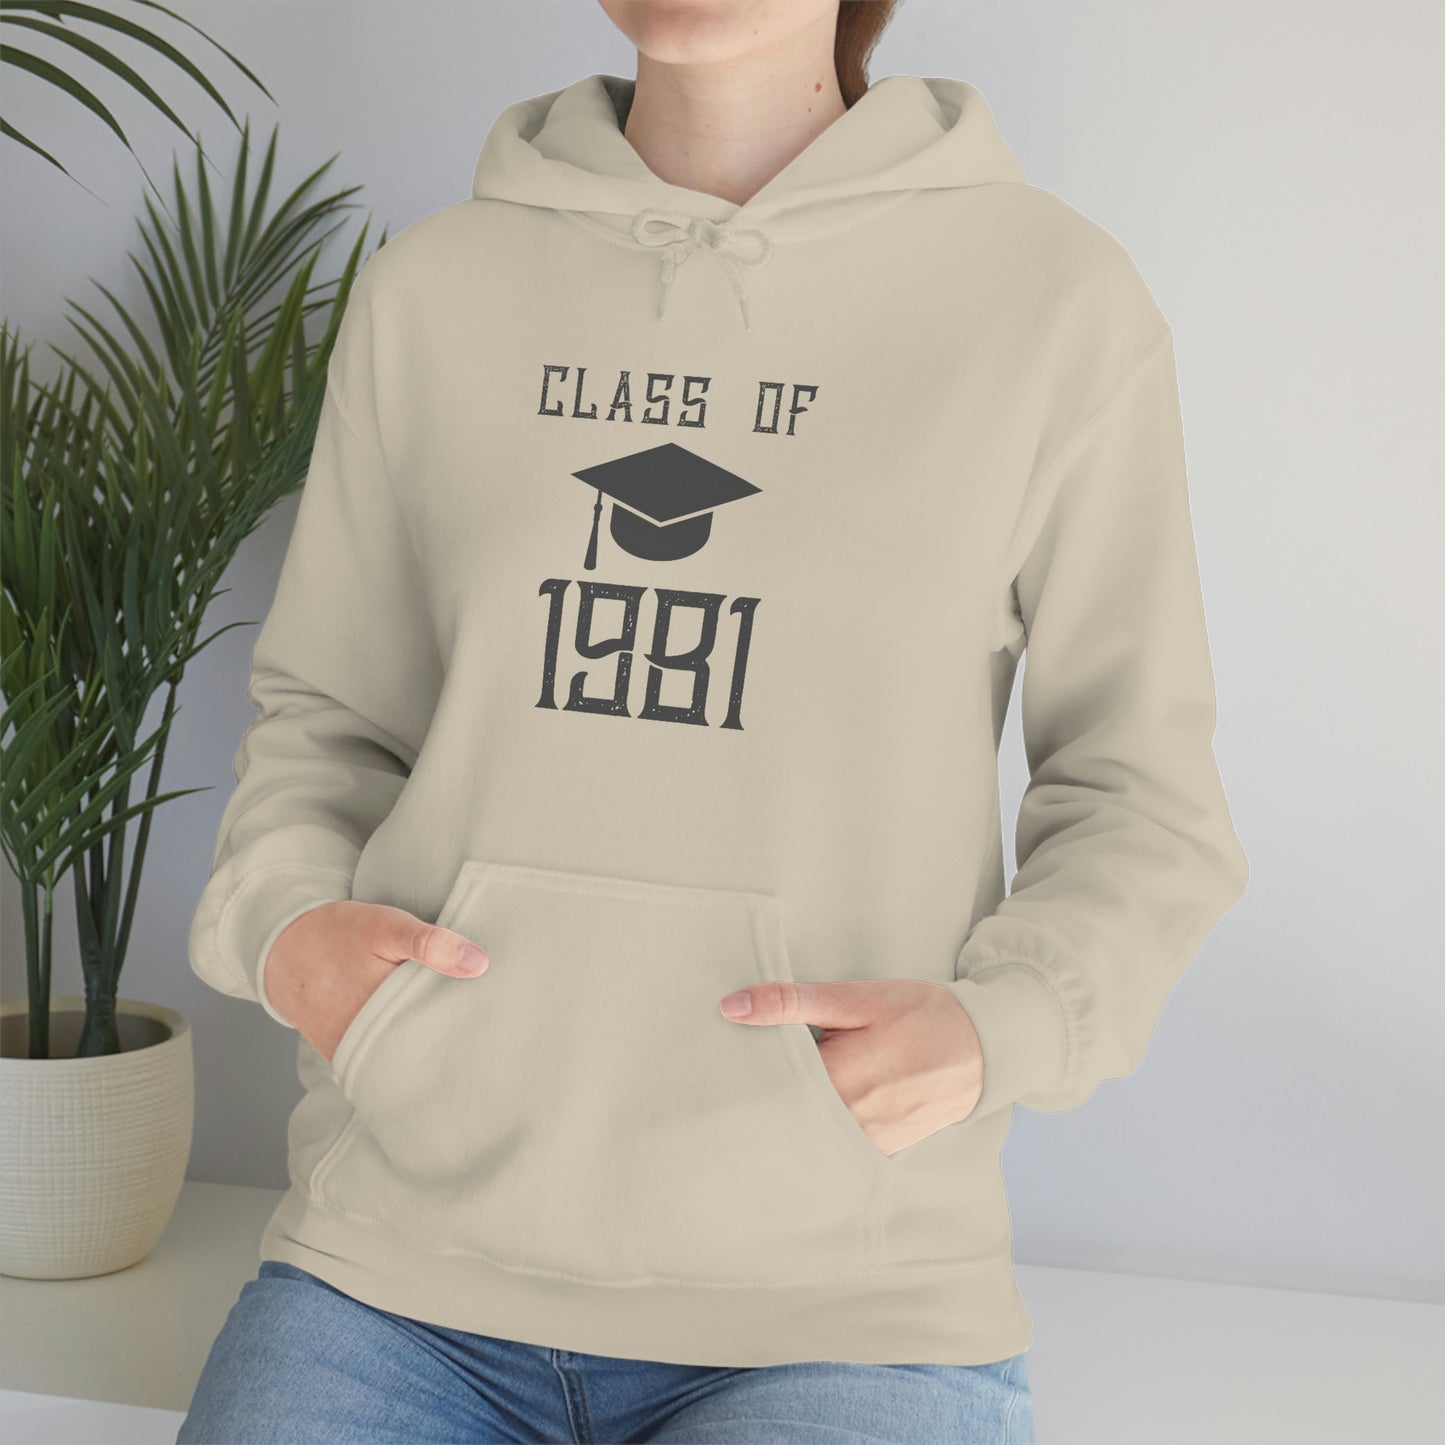 "Proudly wear your 'Class Of 1981' hoodie to celebrate your achievements."